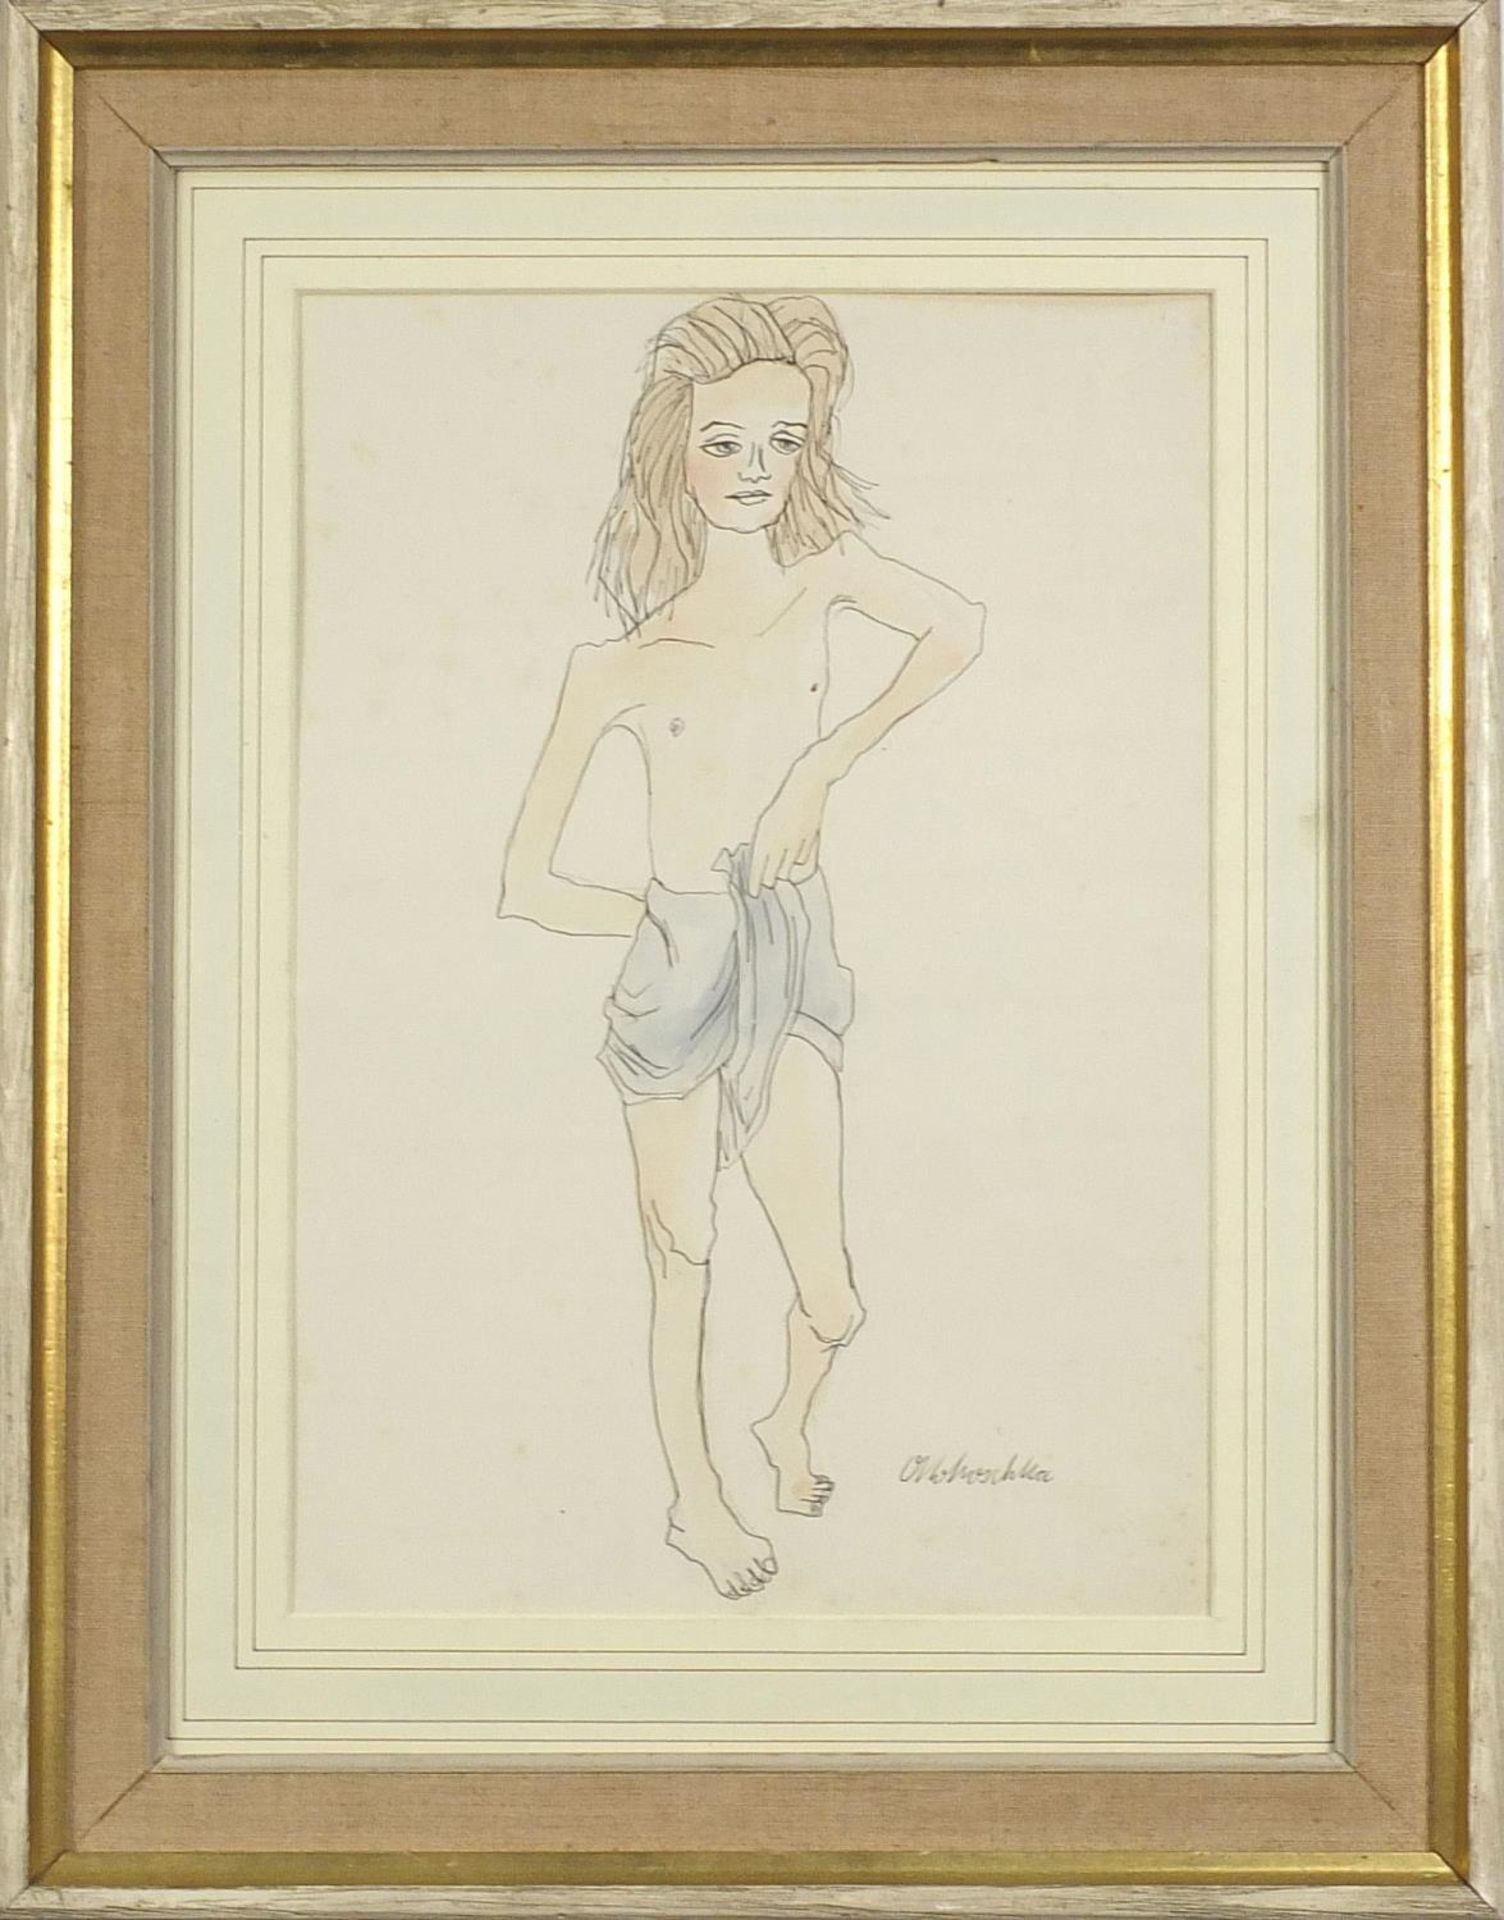 Portrait of a semi nude young man, pen and ink on paper, mounted, framed and glazed, 34cm x 23.5cm - Image 2 of 4